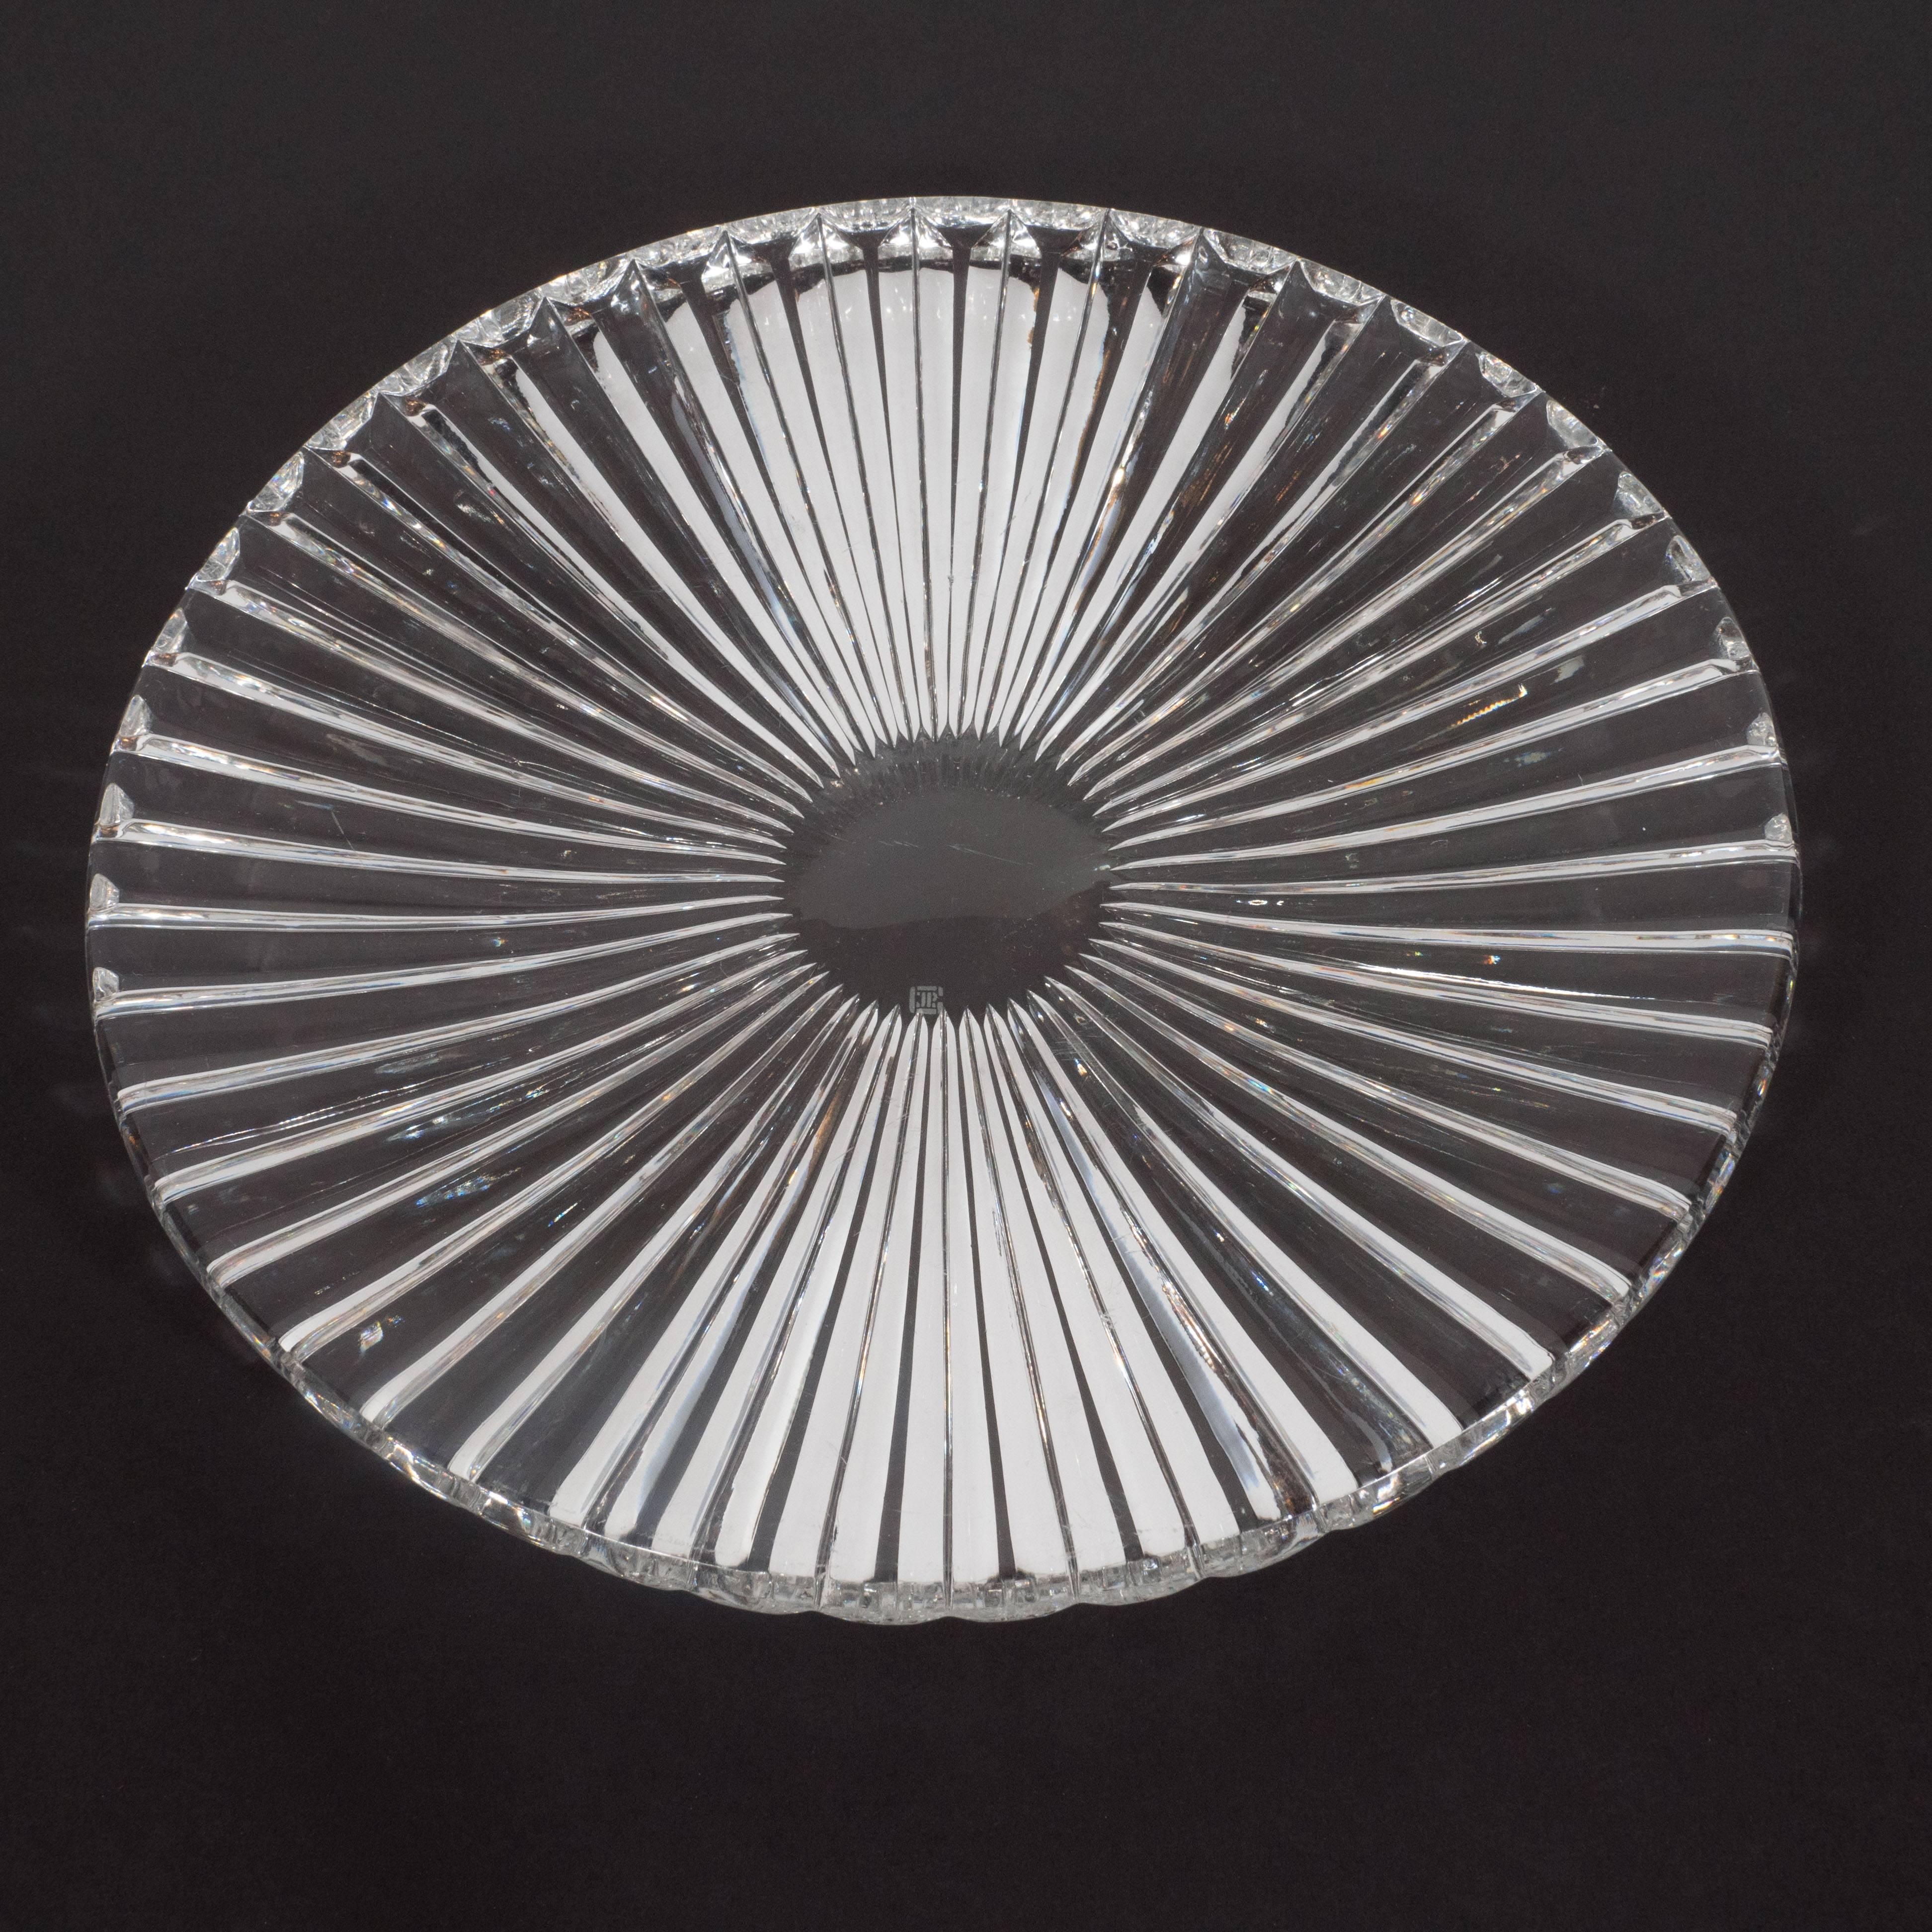 Mid-20th Century Sophisticated Mid-Century Modern Sunburst Etched Crystal Serving Plate For Sale